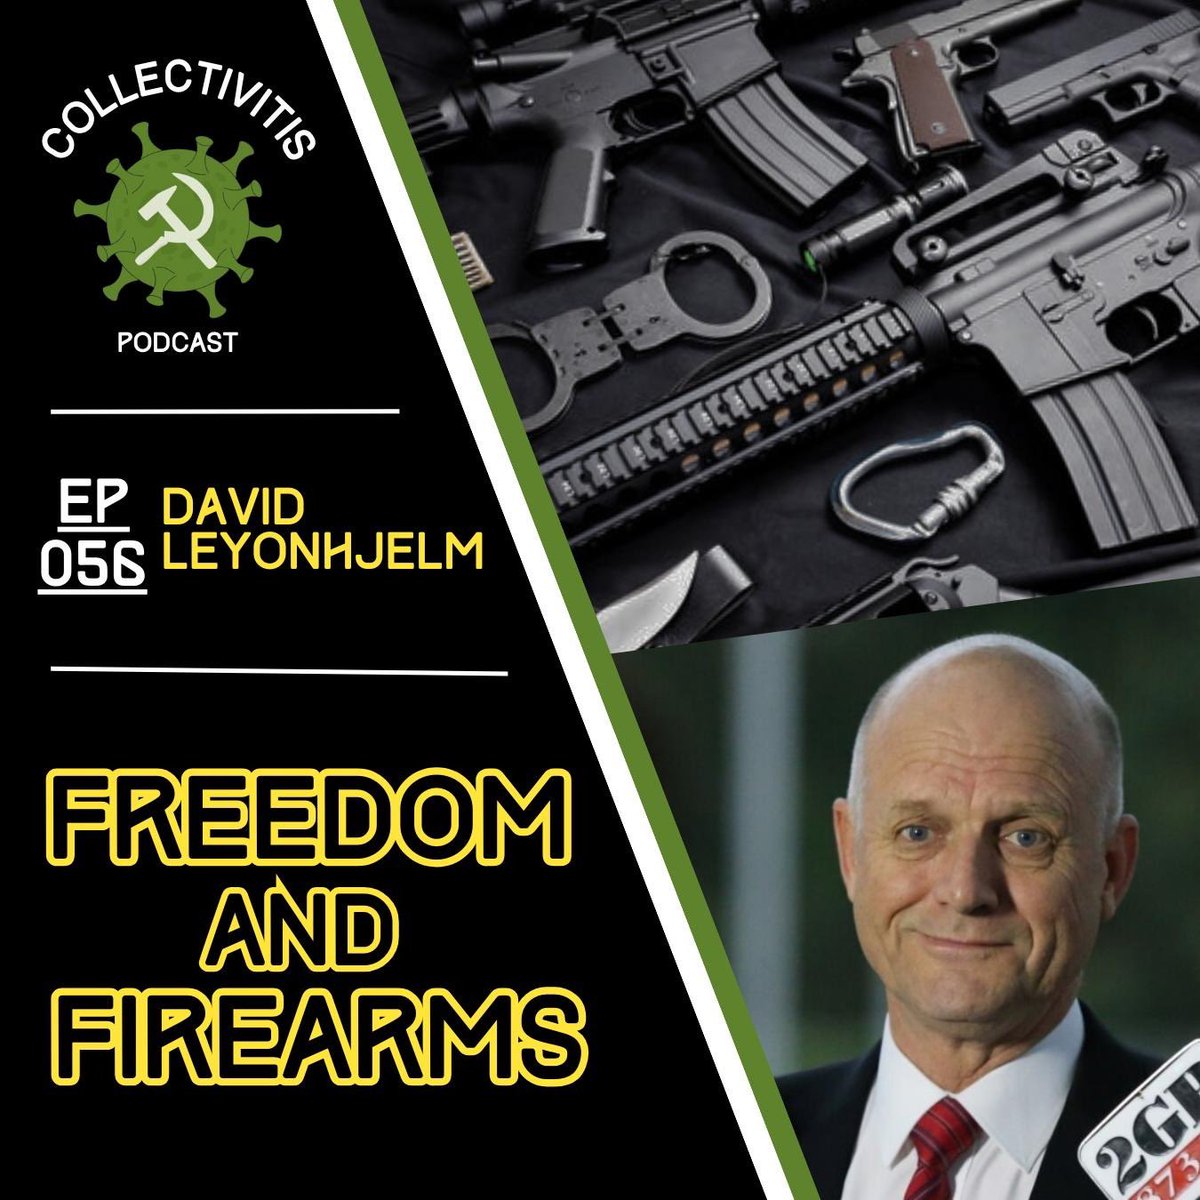 Libertarians want gay people to be able to protect their marijuana plants with guns. 

Former Australian Senator @DavidLeyonhjelm joins us to discuss one of these elements: guns.

New episode, link in bio 🔥

#liberty #libertarian #gunlaws #firearms #davidleyonhjelm